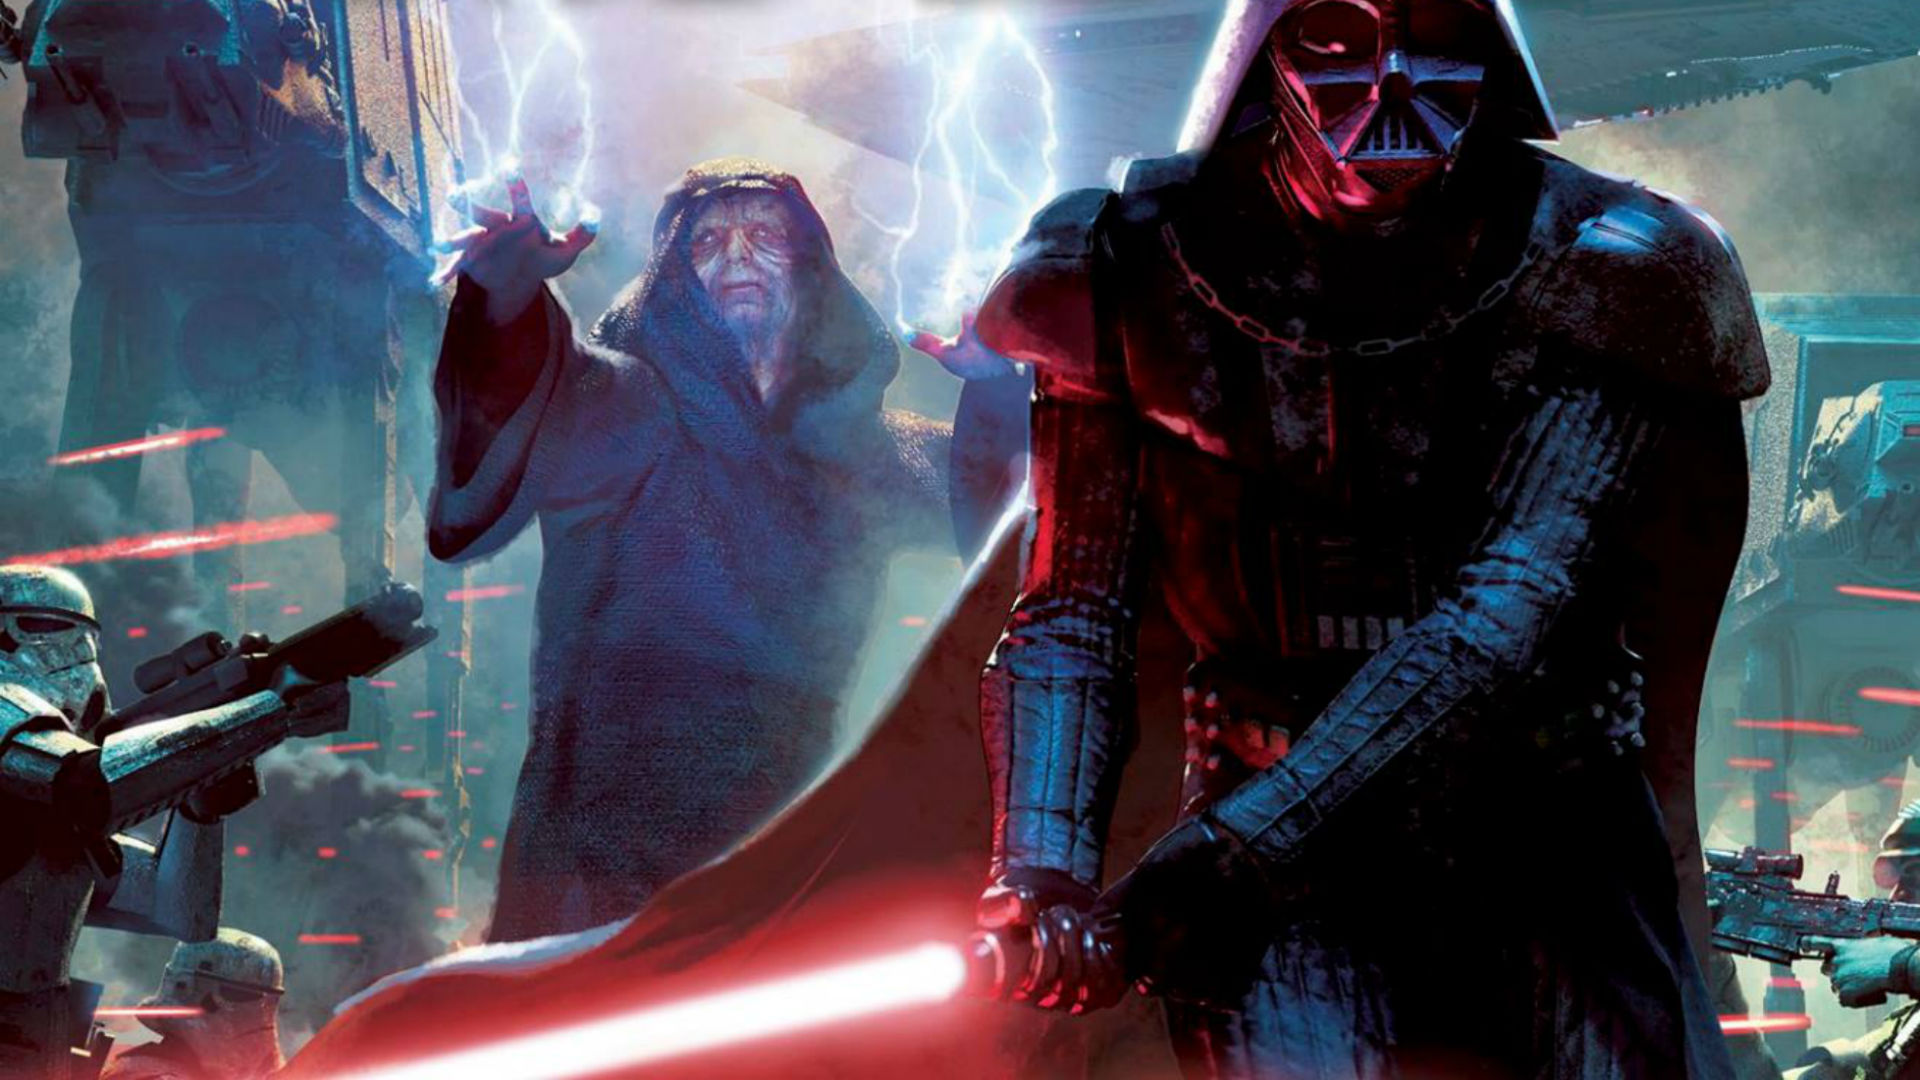 where does star wars force awakens book fit in canon